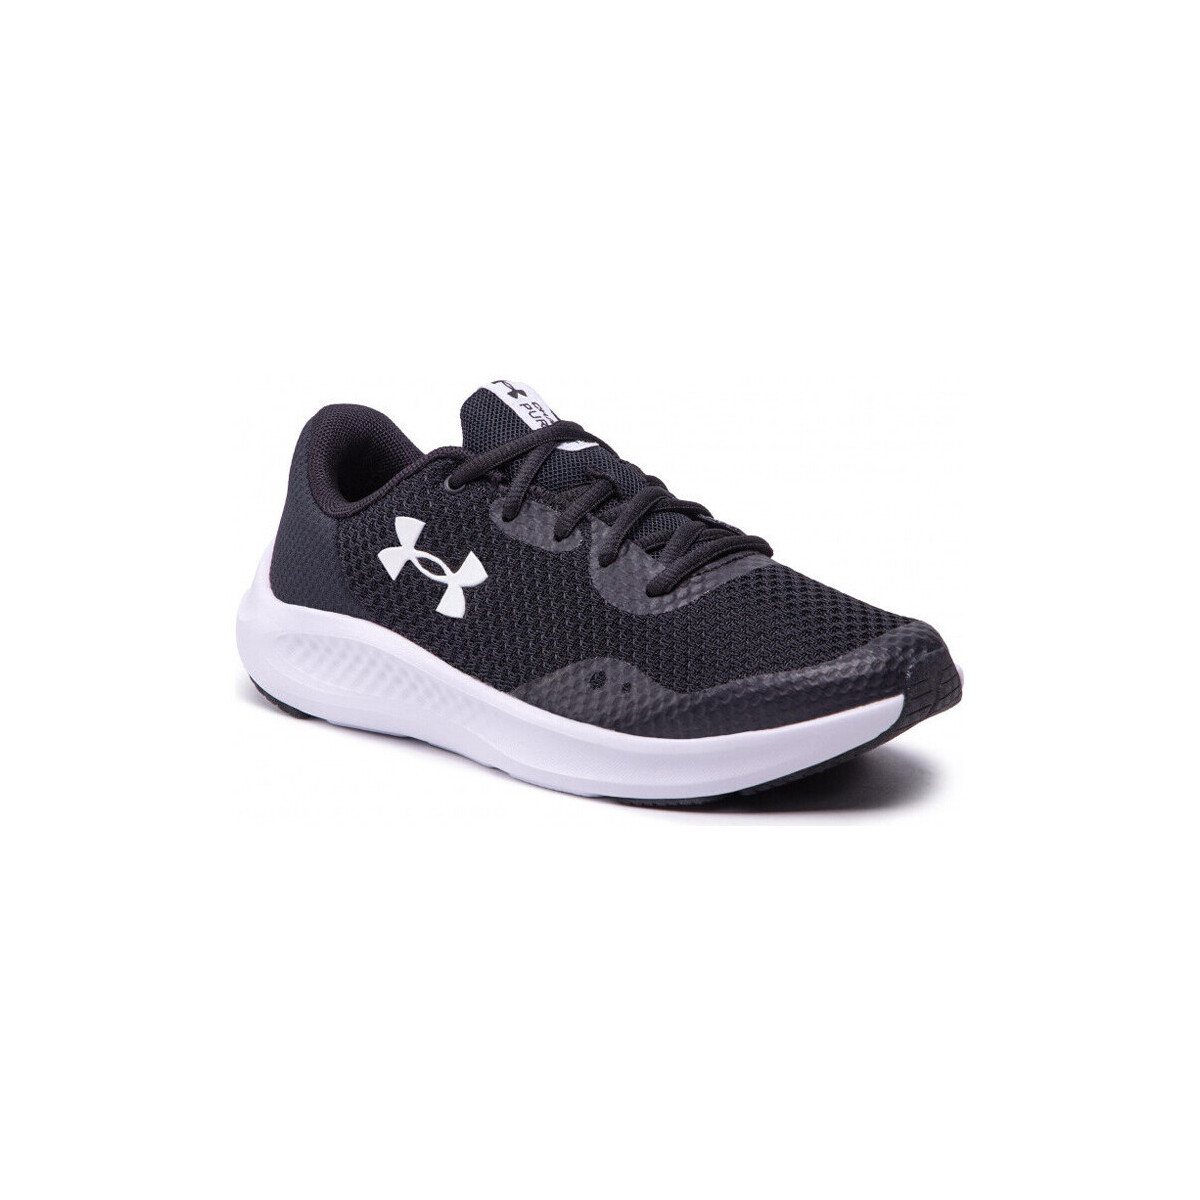 Zapatos Niños Running / trail Under Armour UA BGS Charged Pursuit 3 Negro